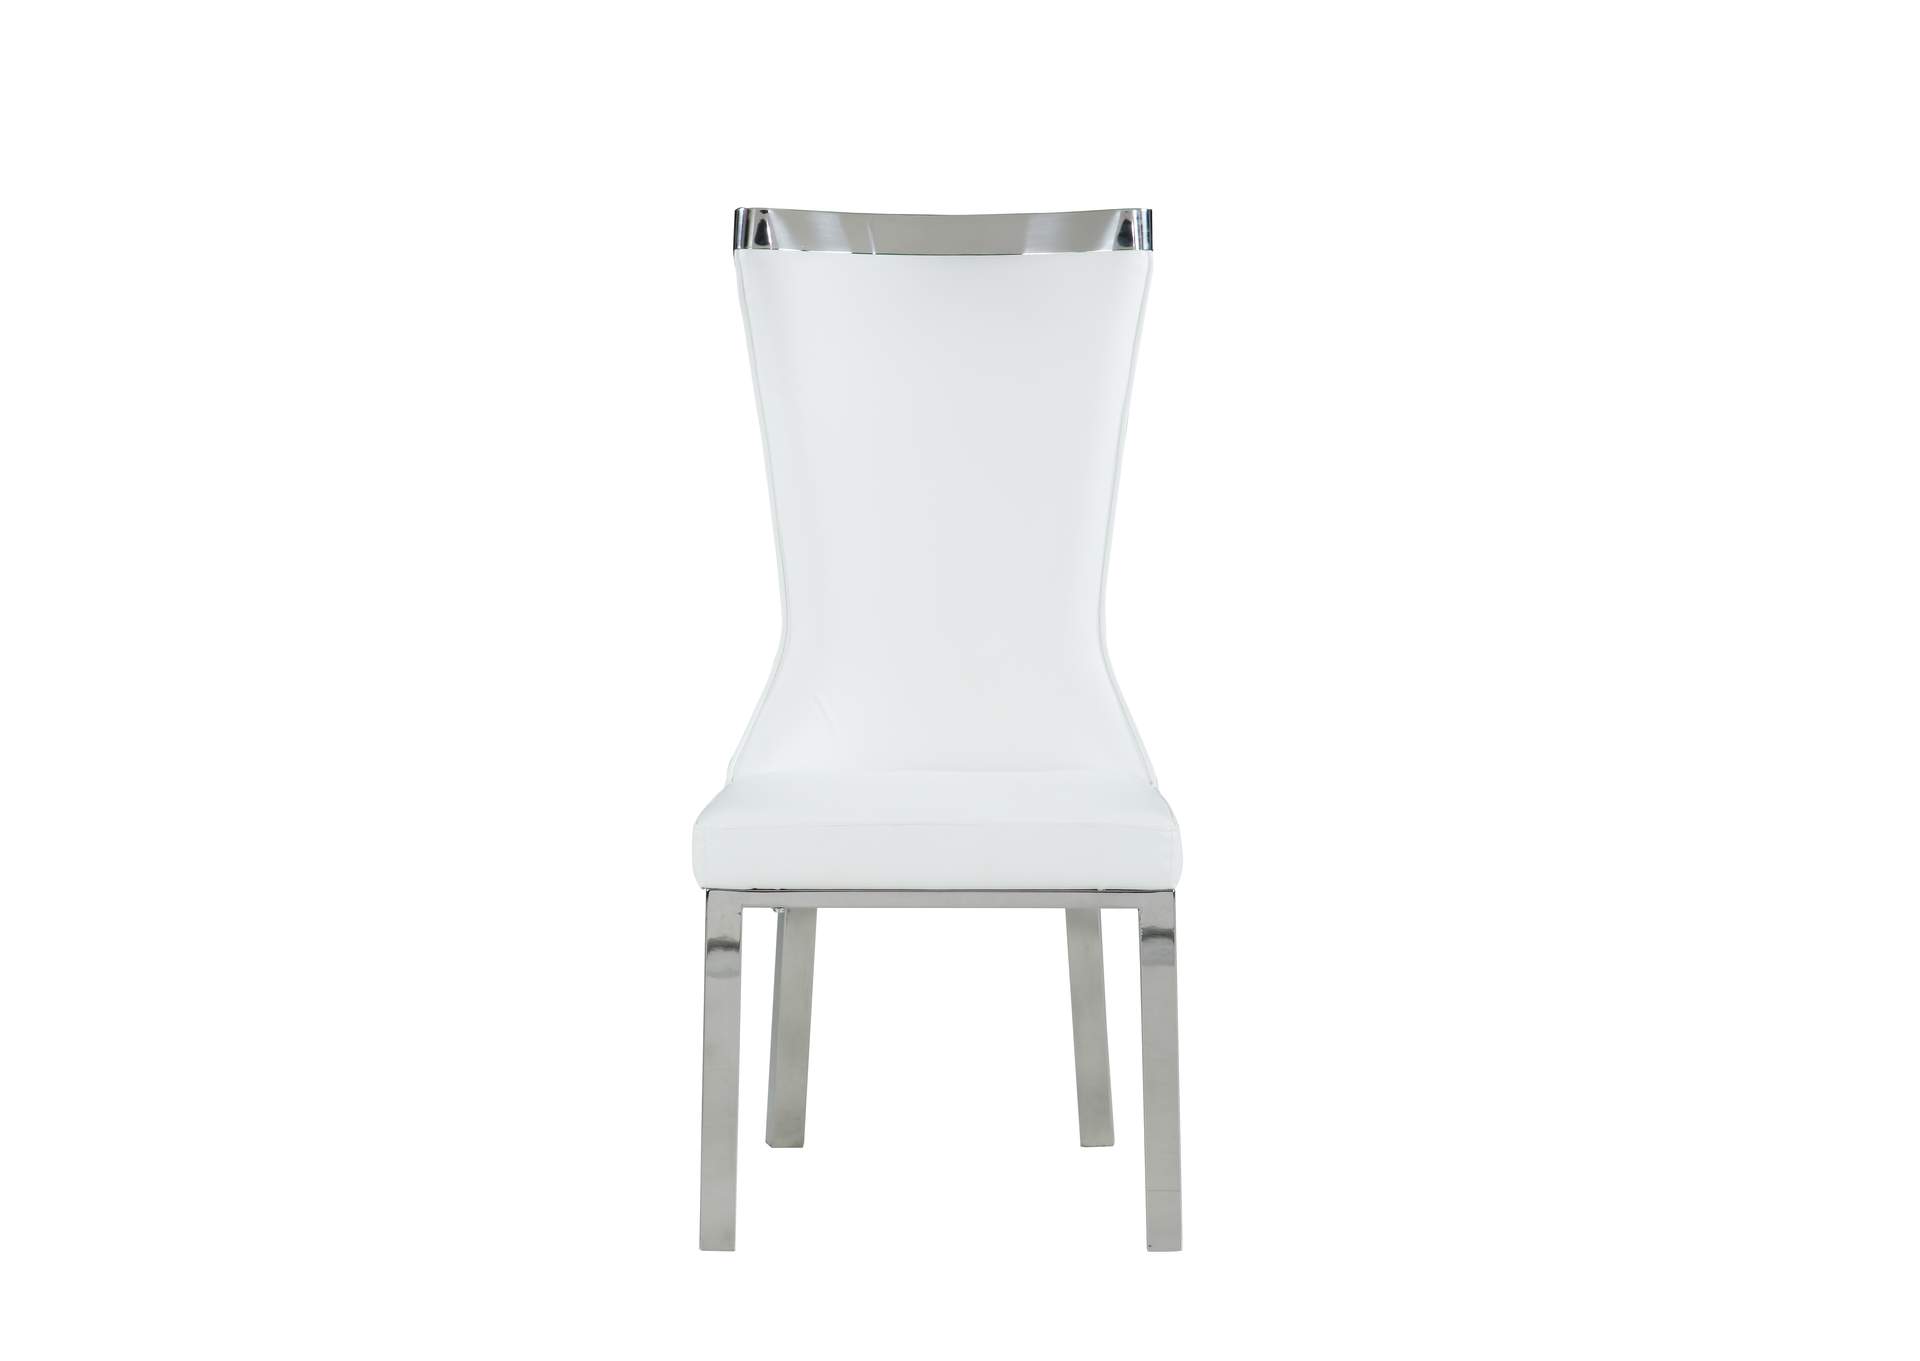 Contemporary Dining Set w/ Rectangular Glass Table & 4 White Chairs,Chintaly Imports